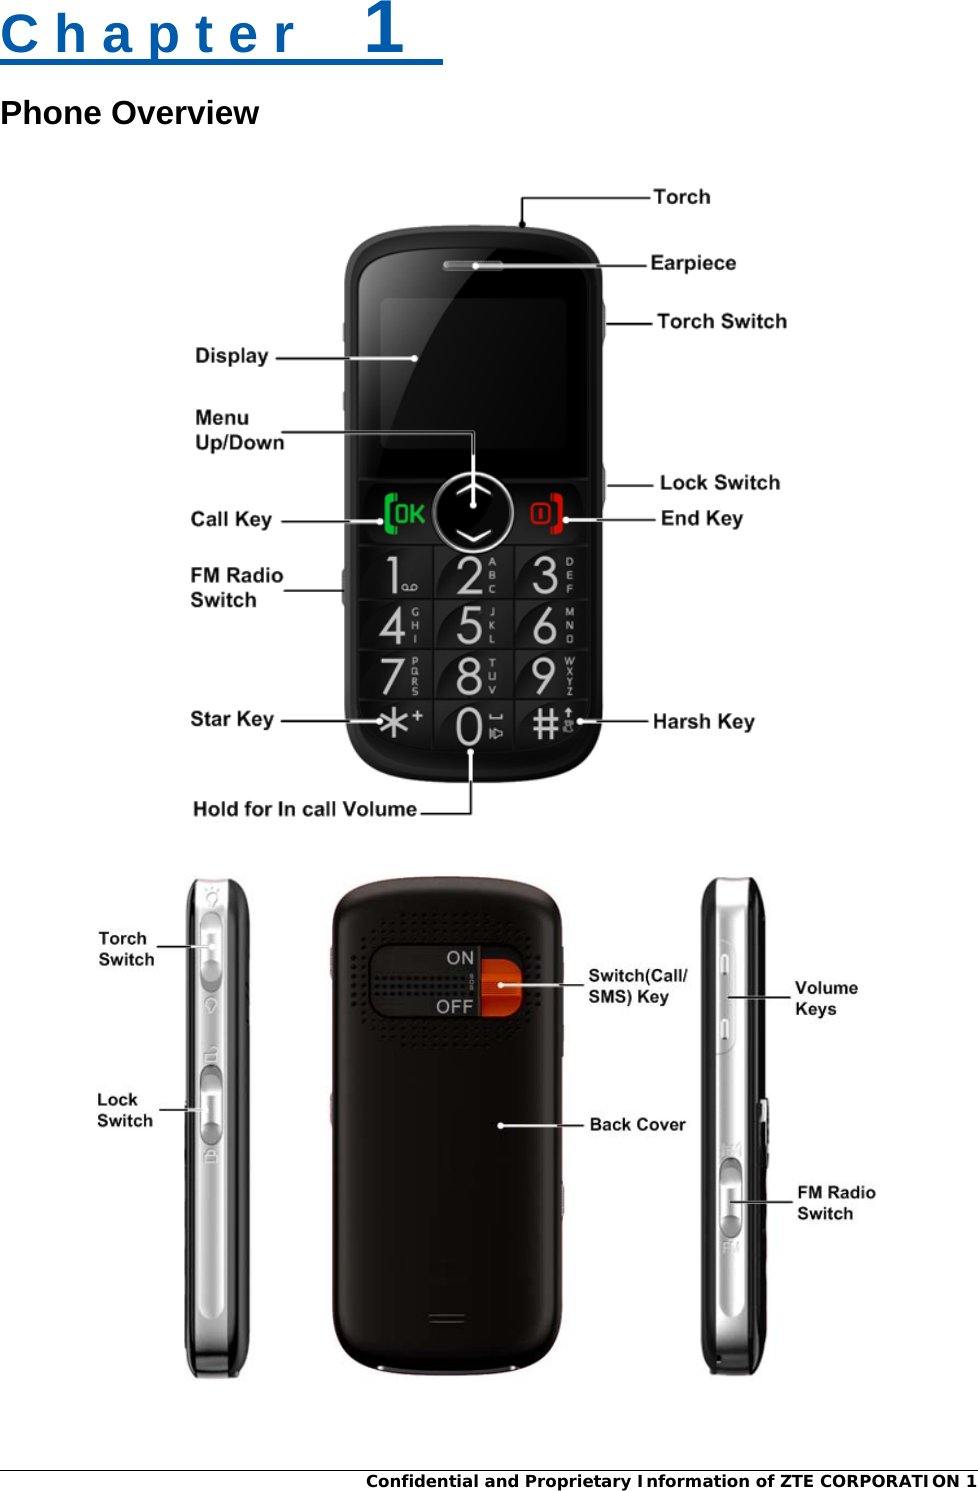  Confidential and Proprietary Information of ZTE CORPORATION 1C h a p t e r    1   Phone Overview    